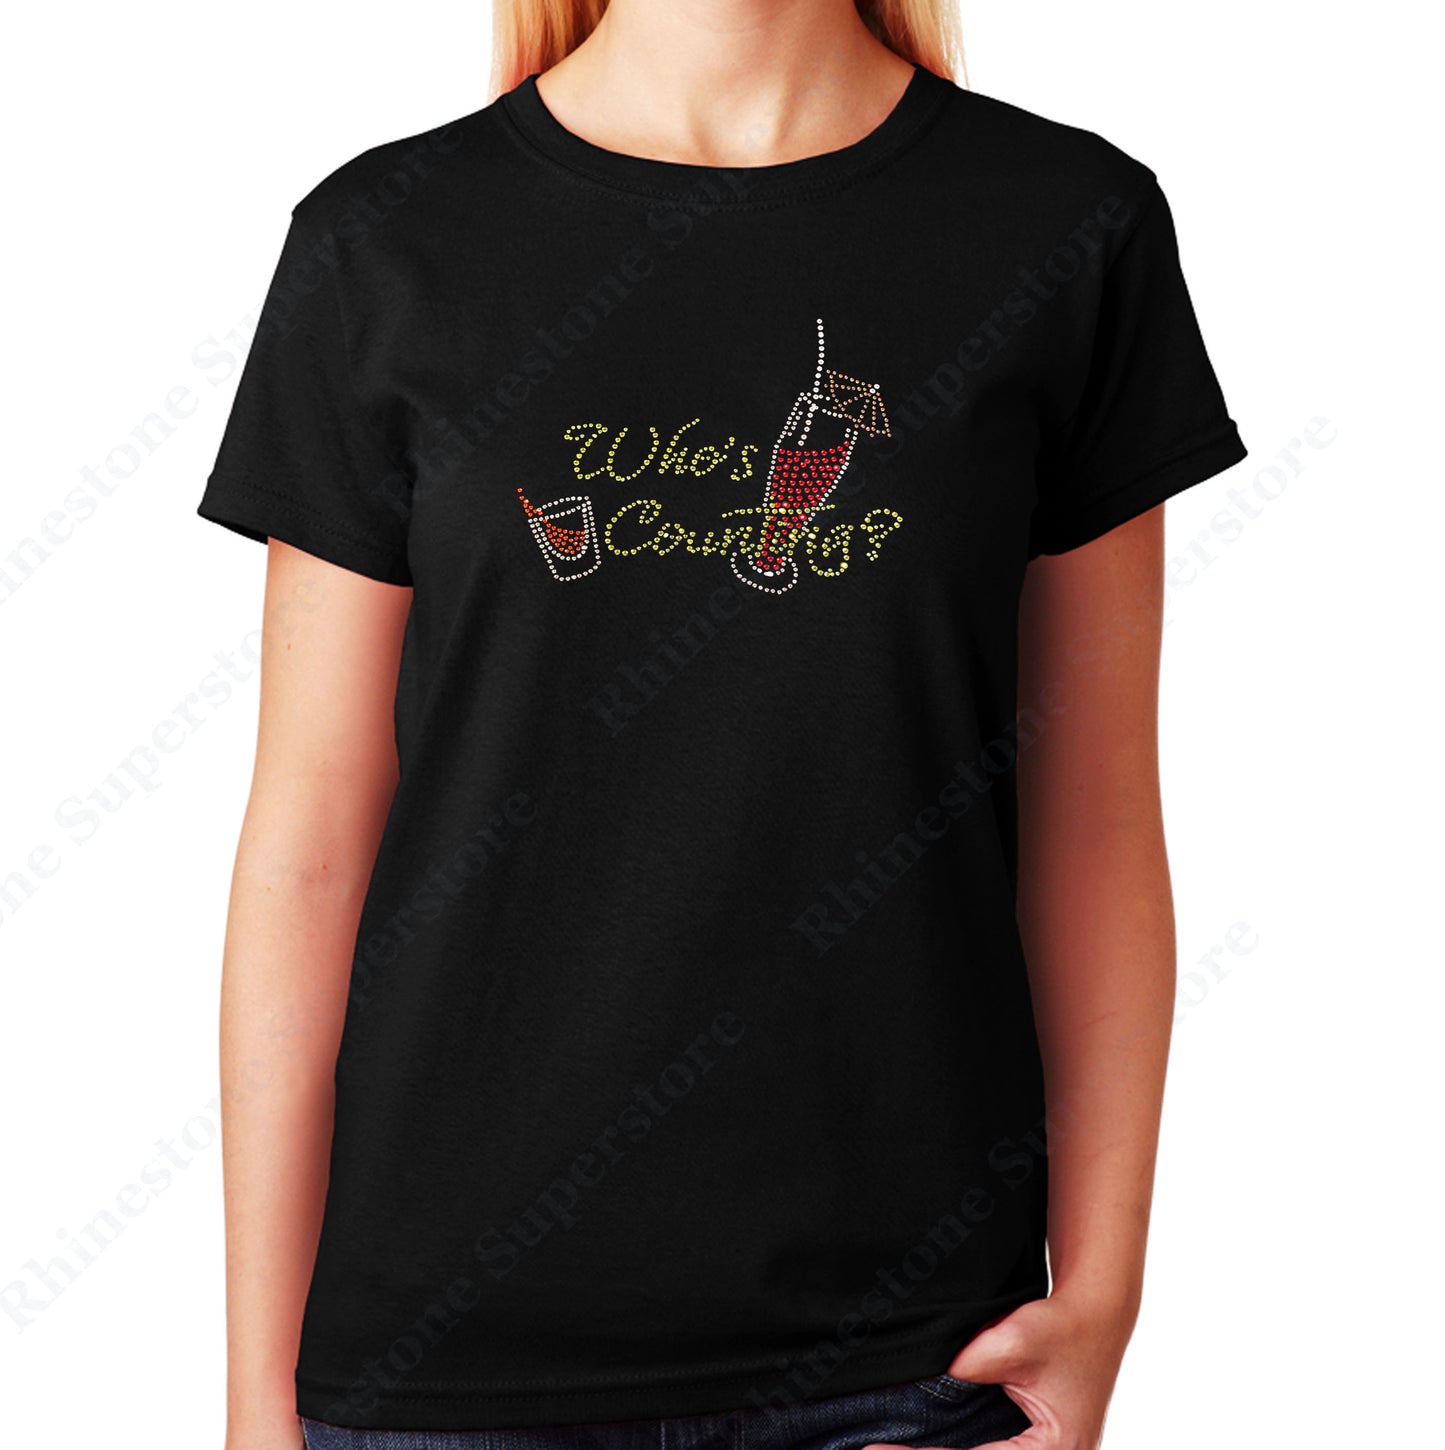 Women's / Unisex T-Shirt with Who's Country, Wine Country in Rhinestones